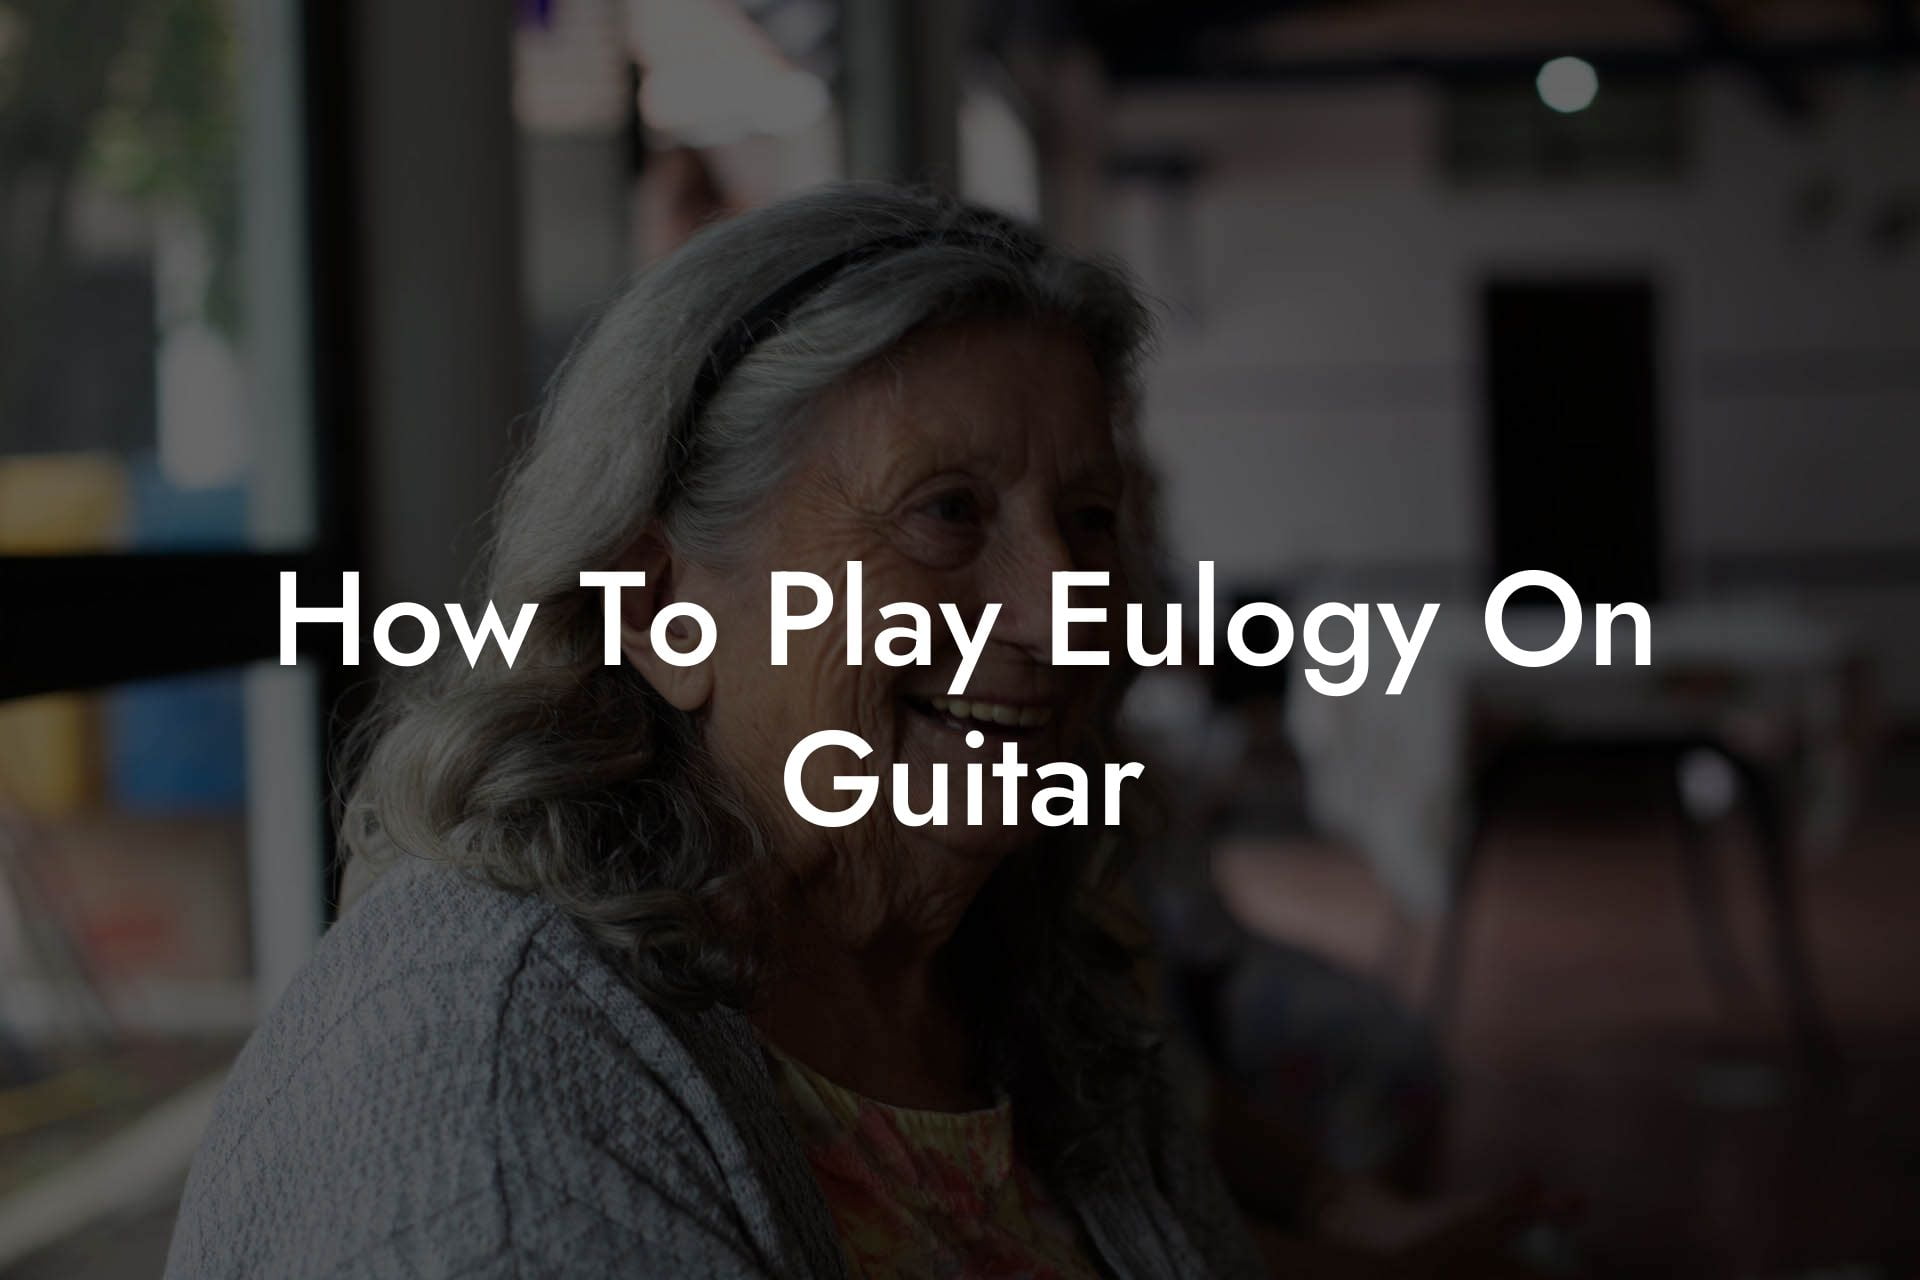 How To Play Eulogy On Guitar